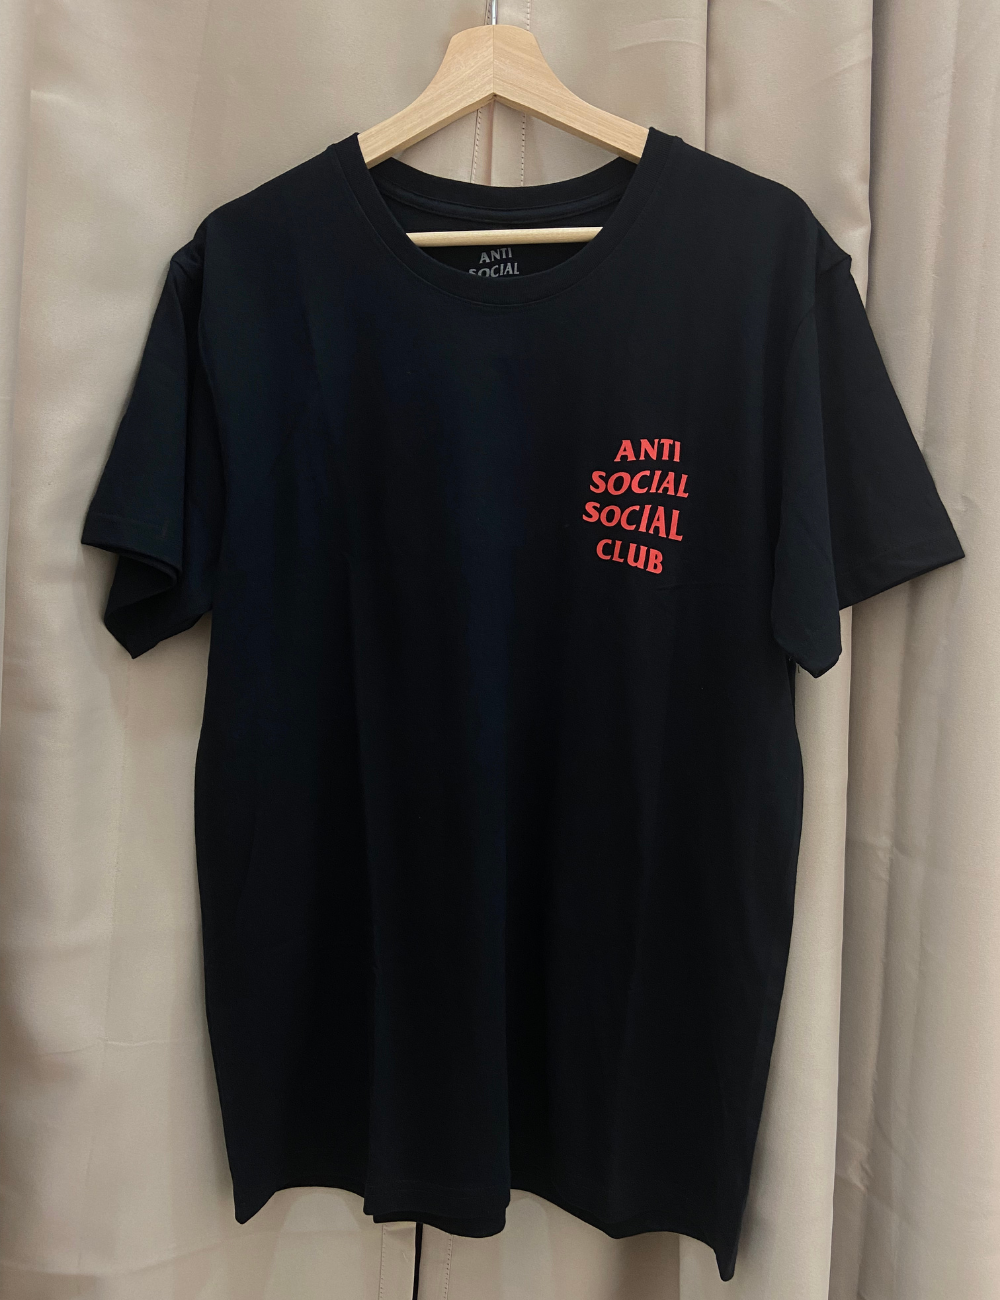 Anti Social Social Club Basic Orange Wording Tee - Shop Streetwear, Sneakers, Slippers and Gifts online | Malaysia - The Factory KL